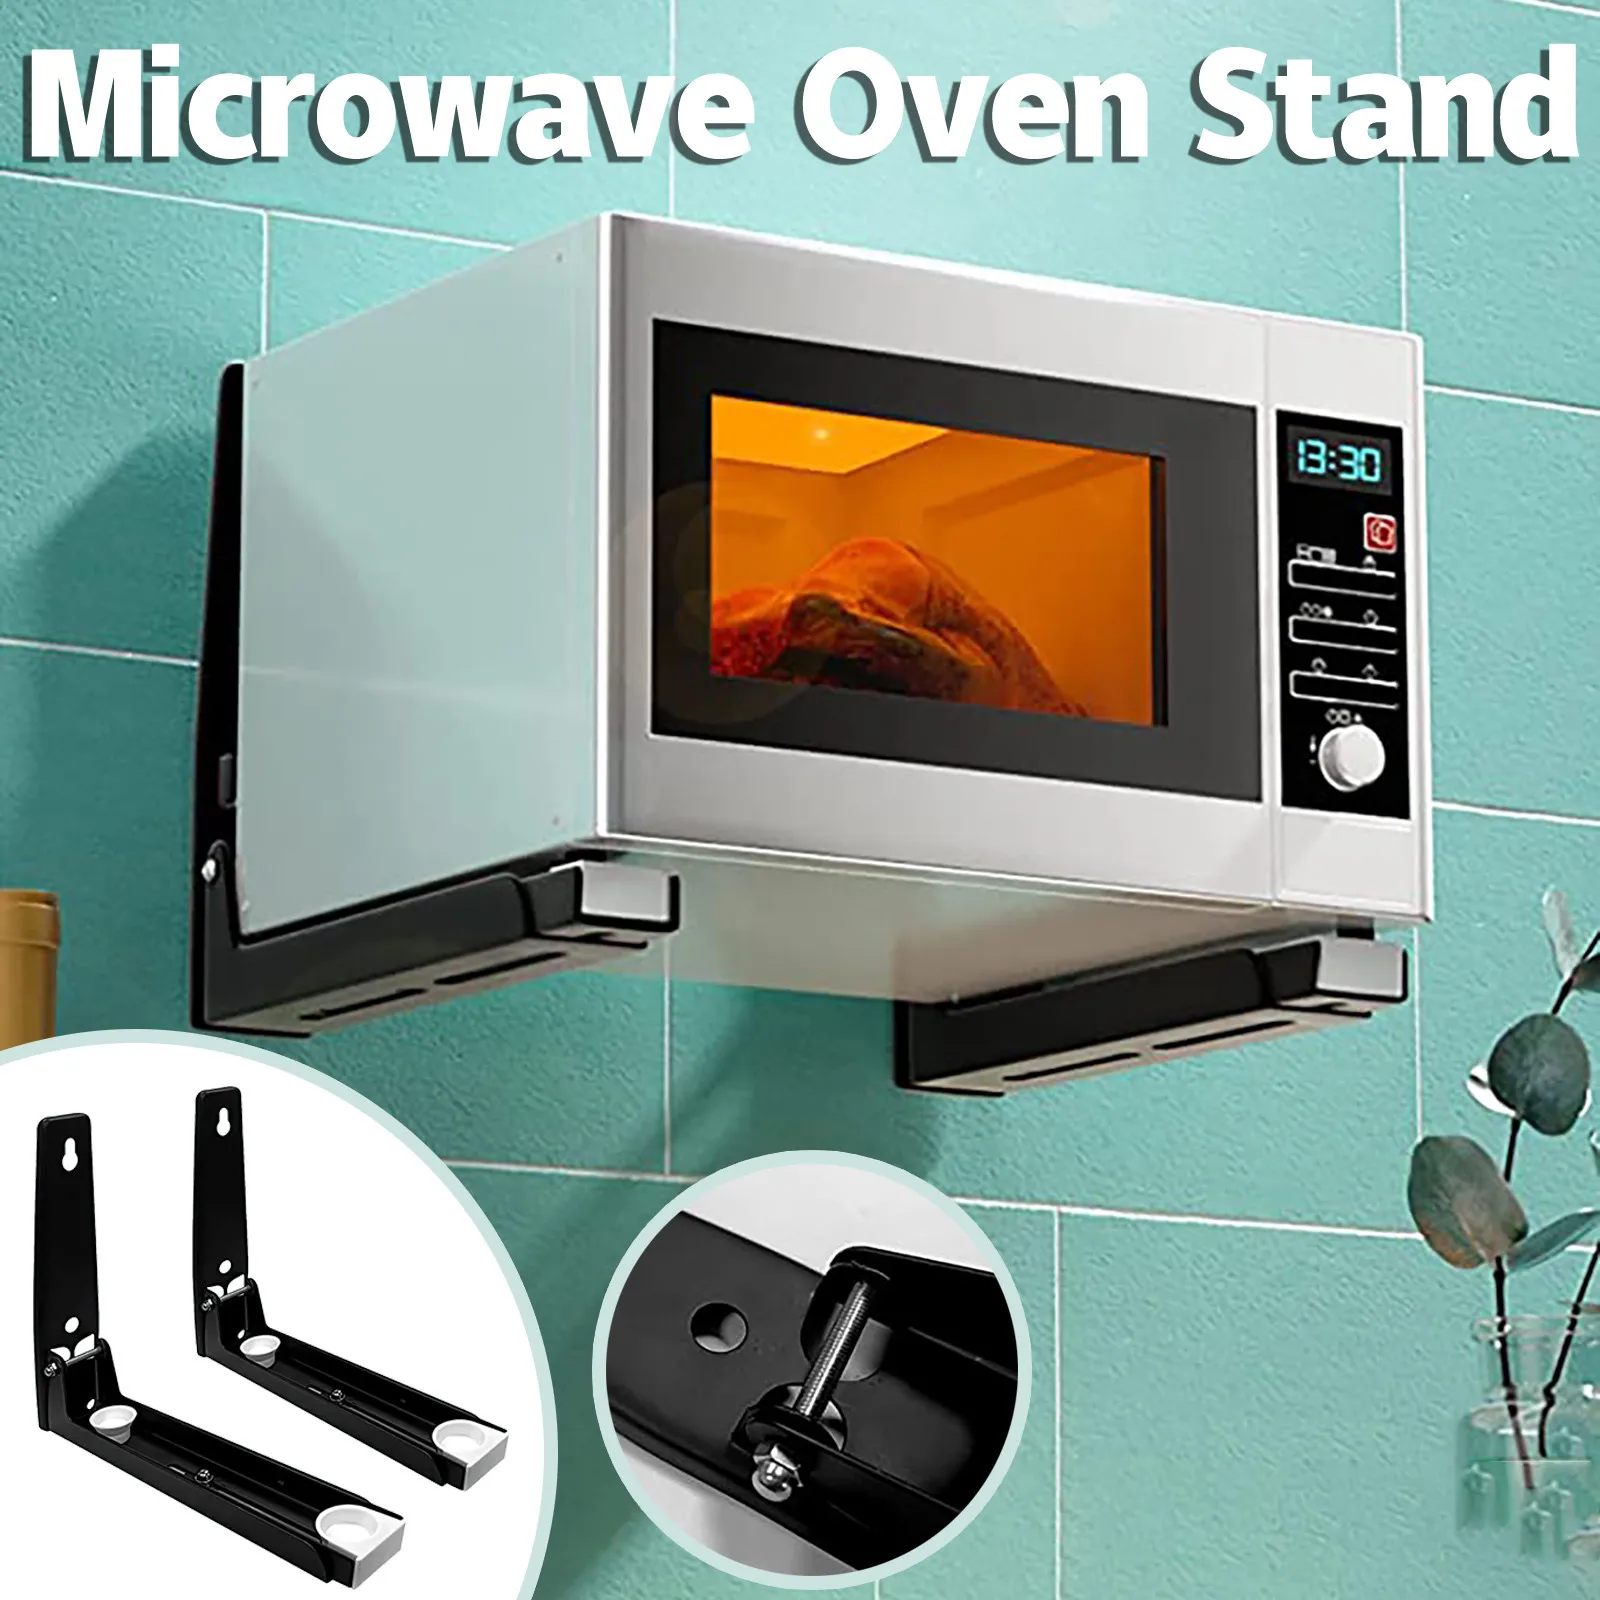 AWADUO 304 Stainless Steel Microwave Oven Rack Retrackable Foldable Microwave Oven Wall Mounted Stand Holder Rack Bracket with Two Hooks 